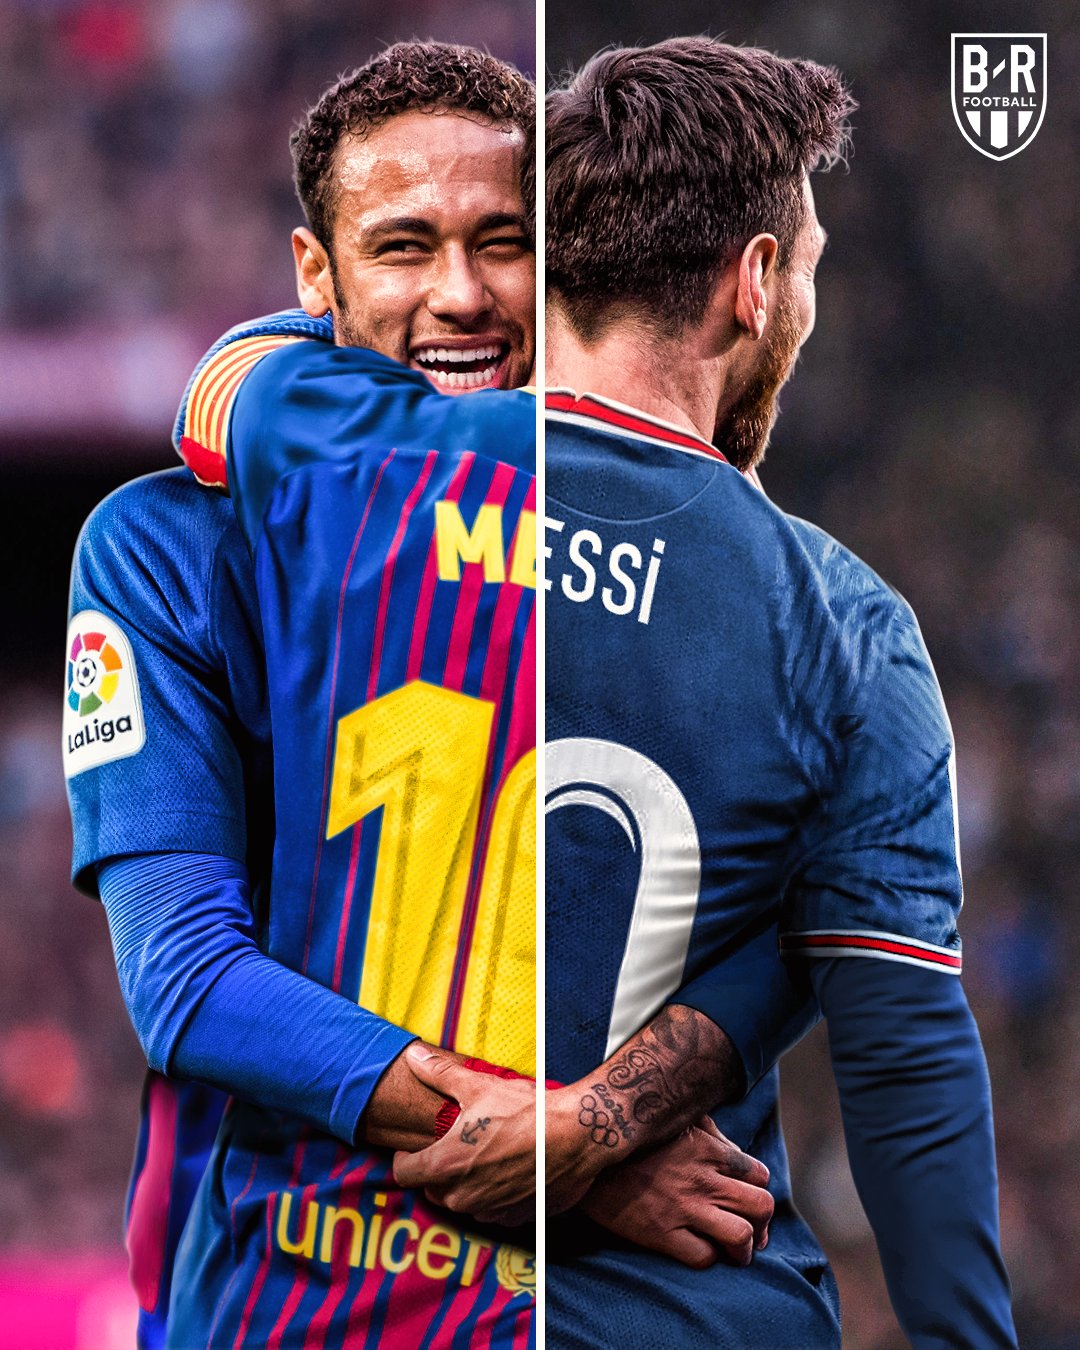 Messi And Neymar In B